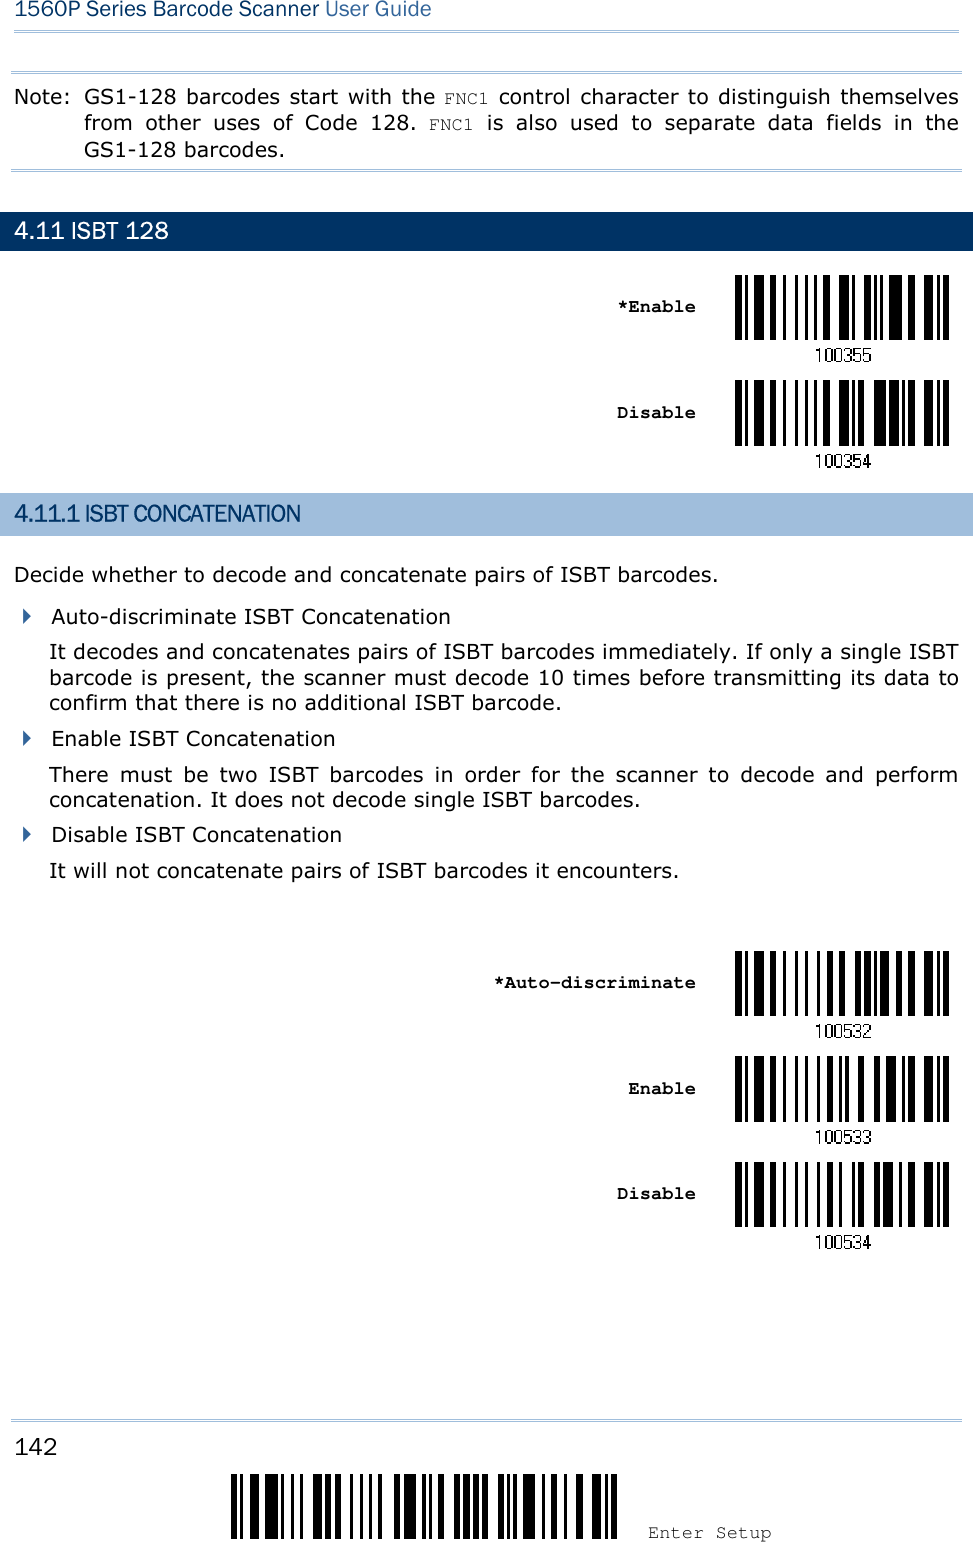 142 Enter Setup 1560P Series Barcode Scanner User Guide Note:  GS1-128 barcodes start with the FNC1 control character to distinguish themselves from  other  uses  of  Code  128.  FNC1  is  also  used  to  separate  data  fields  in  the GS1-128 barcodes. 4.11 ISBT 128 *EnableDisable 4.11.1 ISBT CONCATENATION Decide whether to decode and concatenate pairs of ISBT barcodes. Auto-discriminate ISBT ConcatenationIt decodes and concatenates pairs of ISBT barcodes immediately. If only a single ISBTbarcode is present, the scanner must decode 10 times before transmitting its data toconfirm that there is no additional ISBT barcode.Enable ISBT ConcatenationThere  must  be  two  ISBT  barcodes  in  order  for  the  scanner  to  decode  and  performconcatenation. It does not decode single ISBT barcodes.Disable ISBT ConcatenationIt will not concatenate pairs of ISBT barcodes it encounters.*Auto-discriminateEnable Disable 